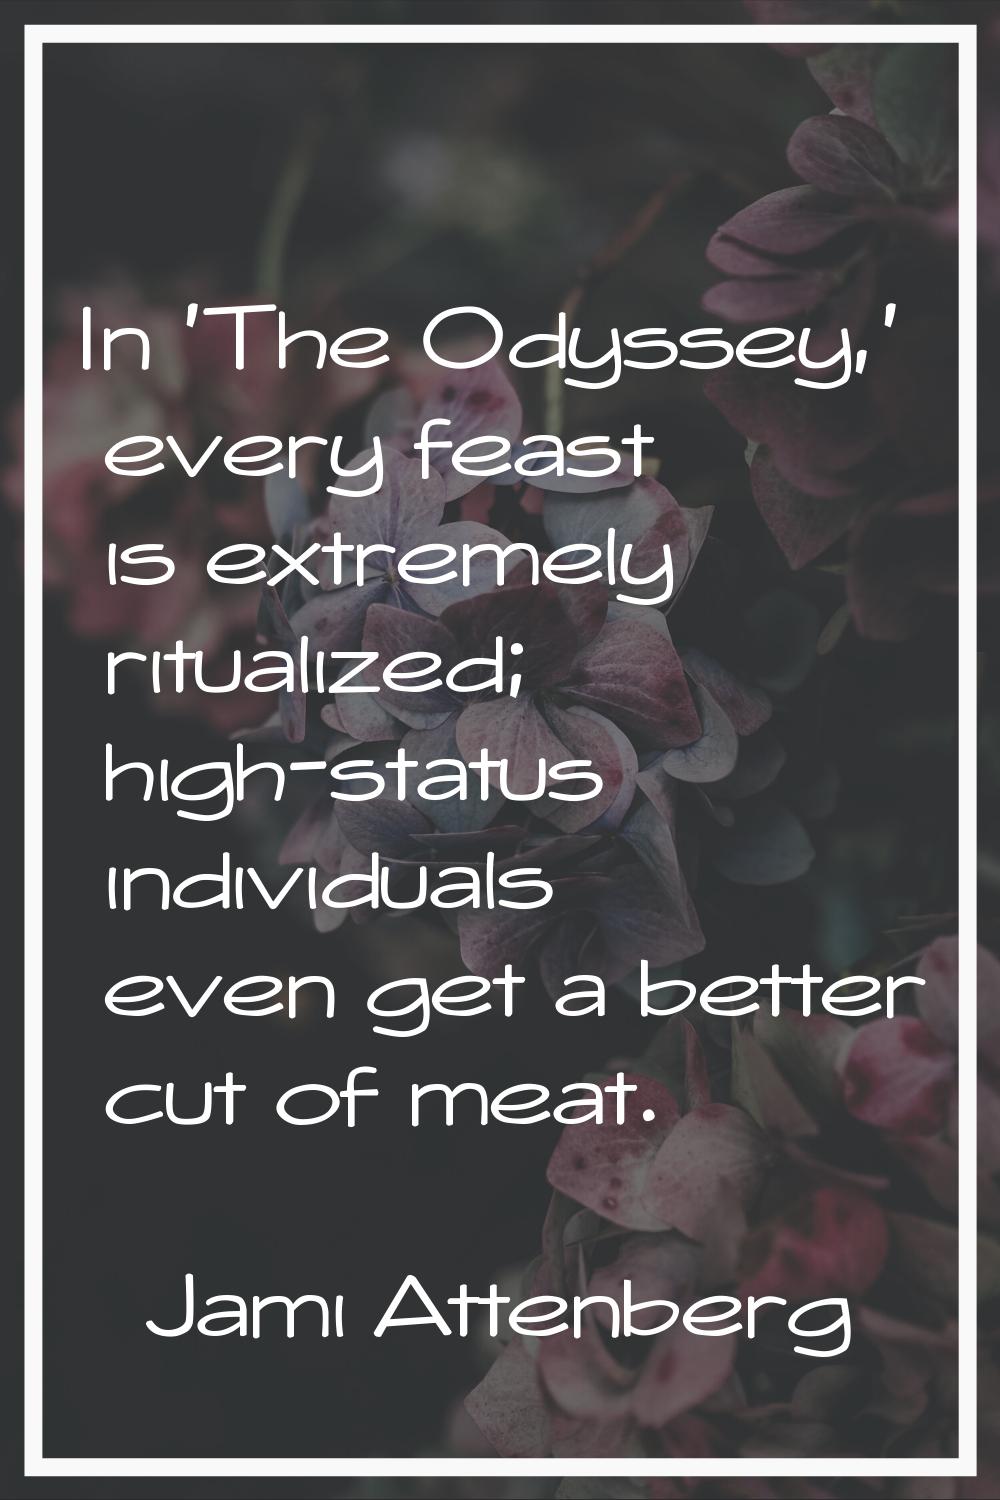 In 'The Odyssey,' every feast is extremely ritualized; high-status individuals even get a better cu